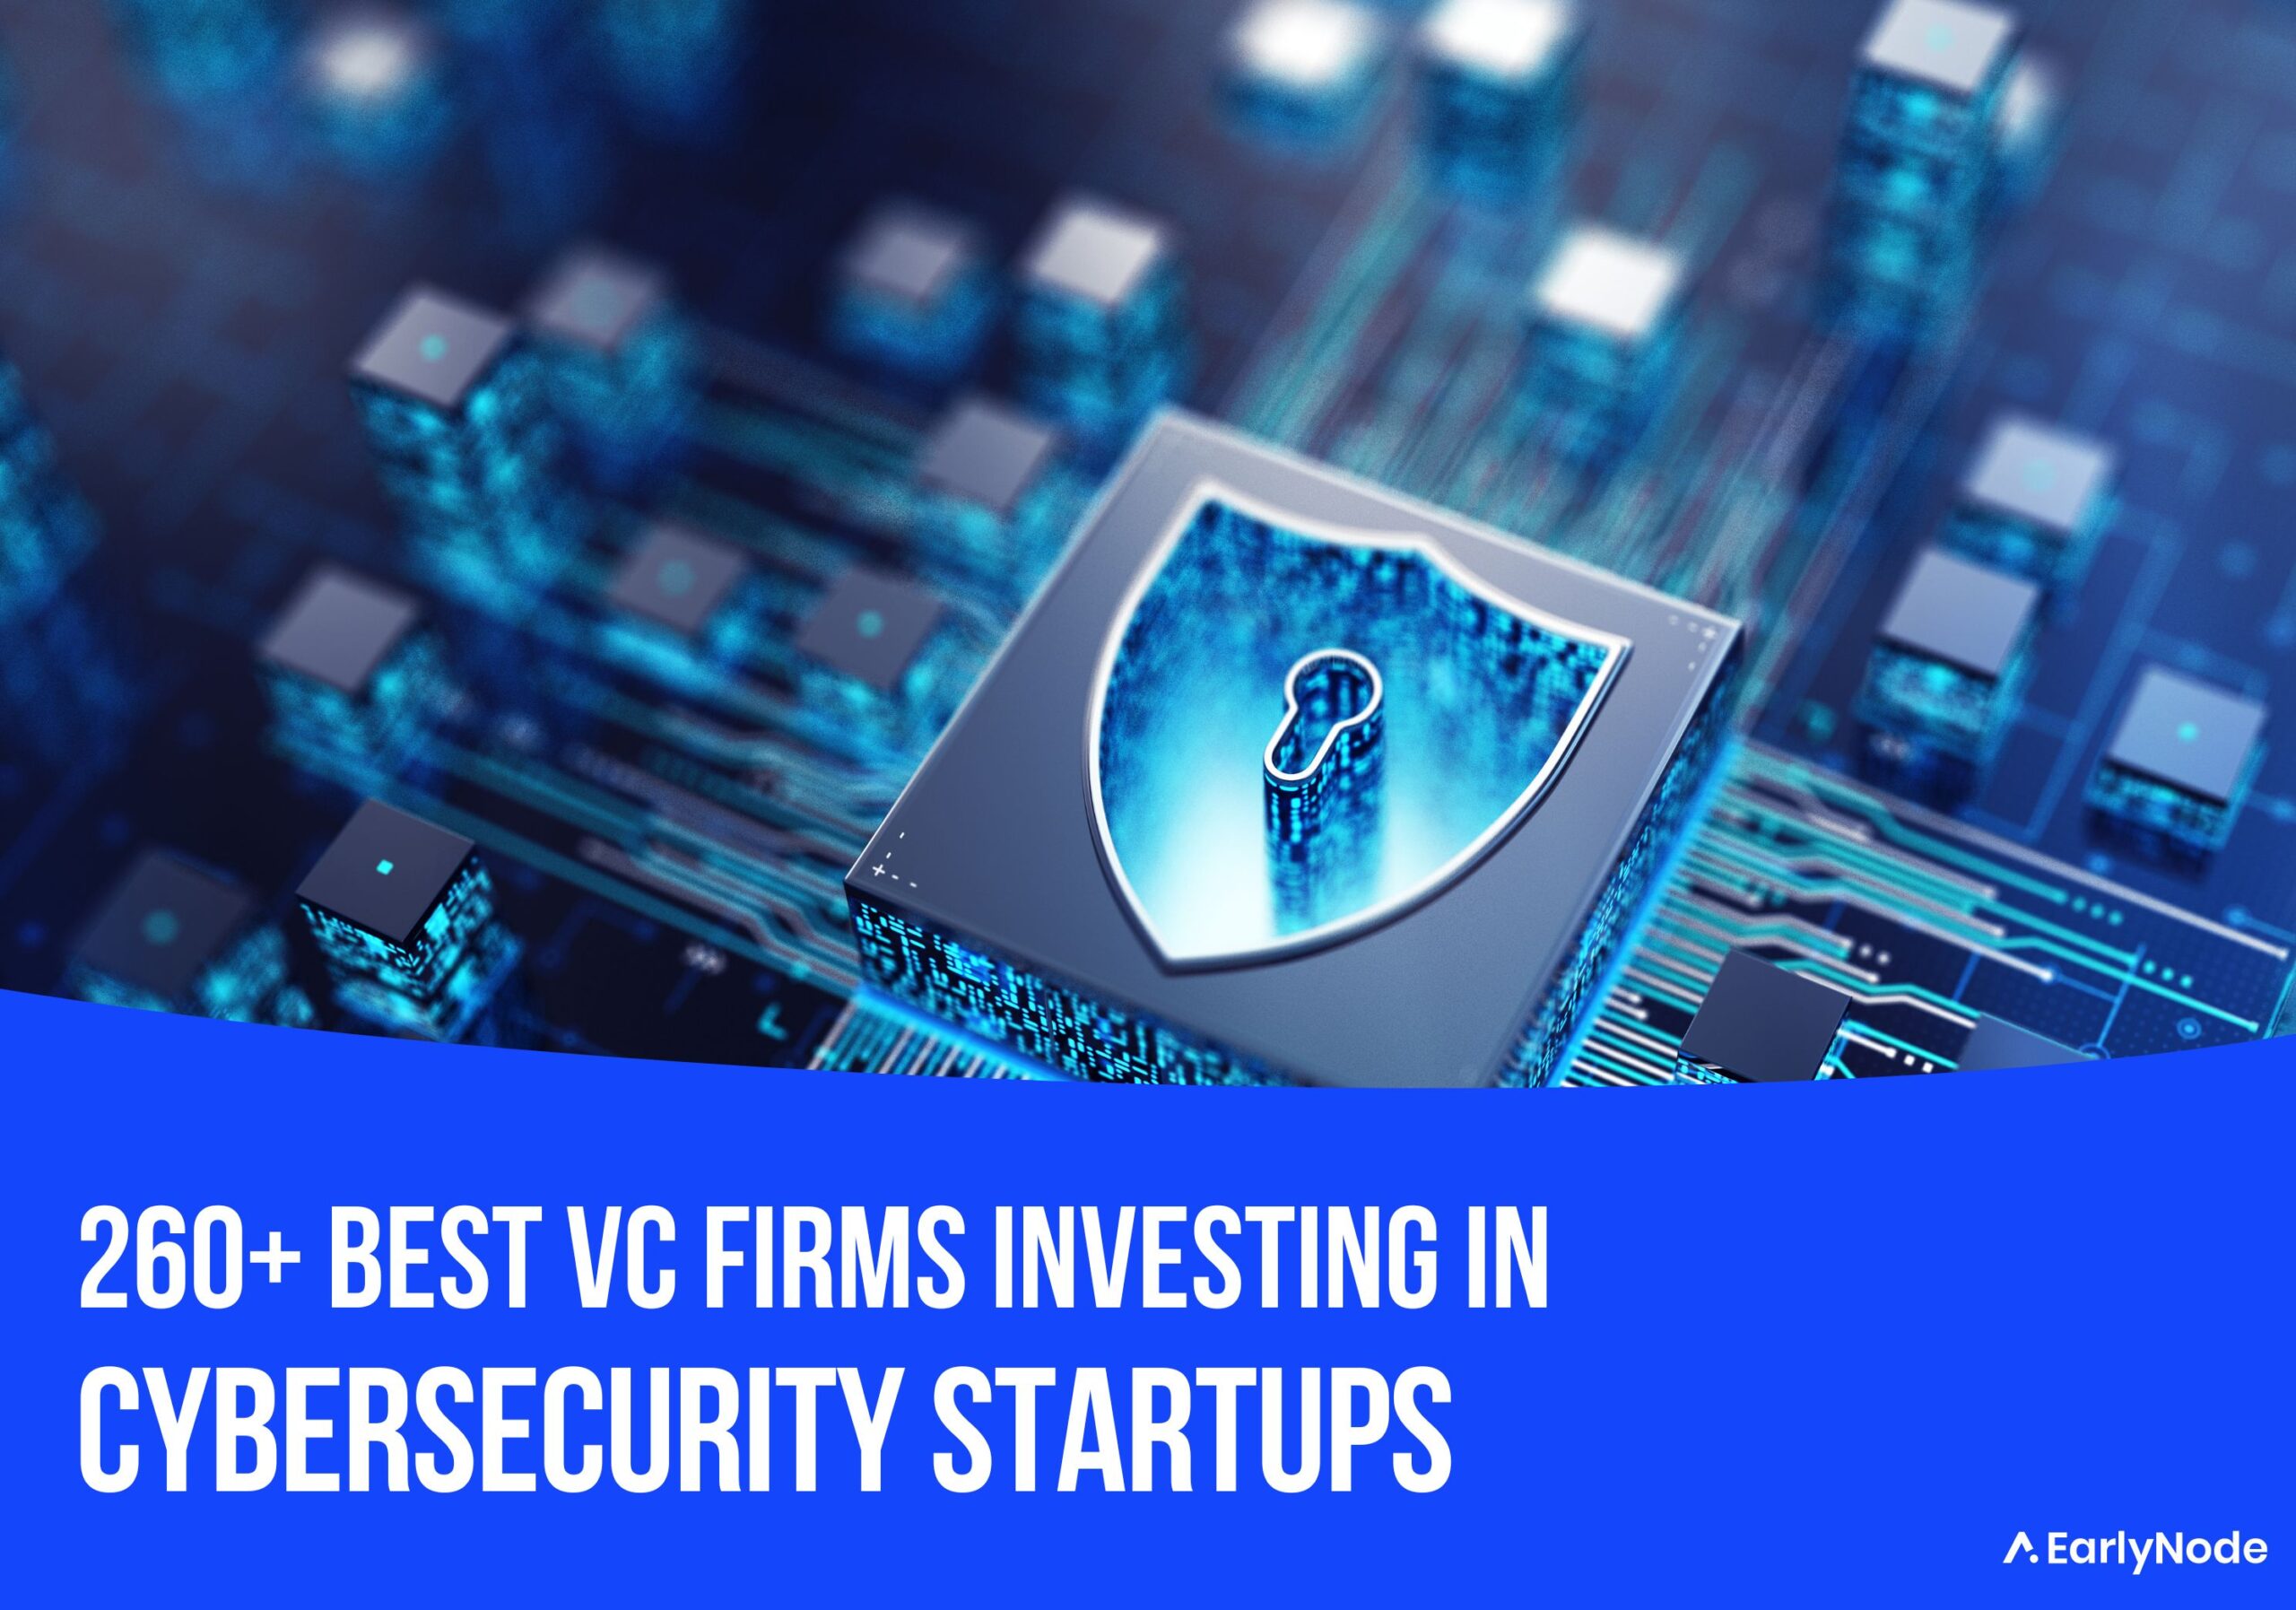 70+ Best Venture Capital (VC) Firms for CyberSecurity